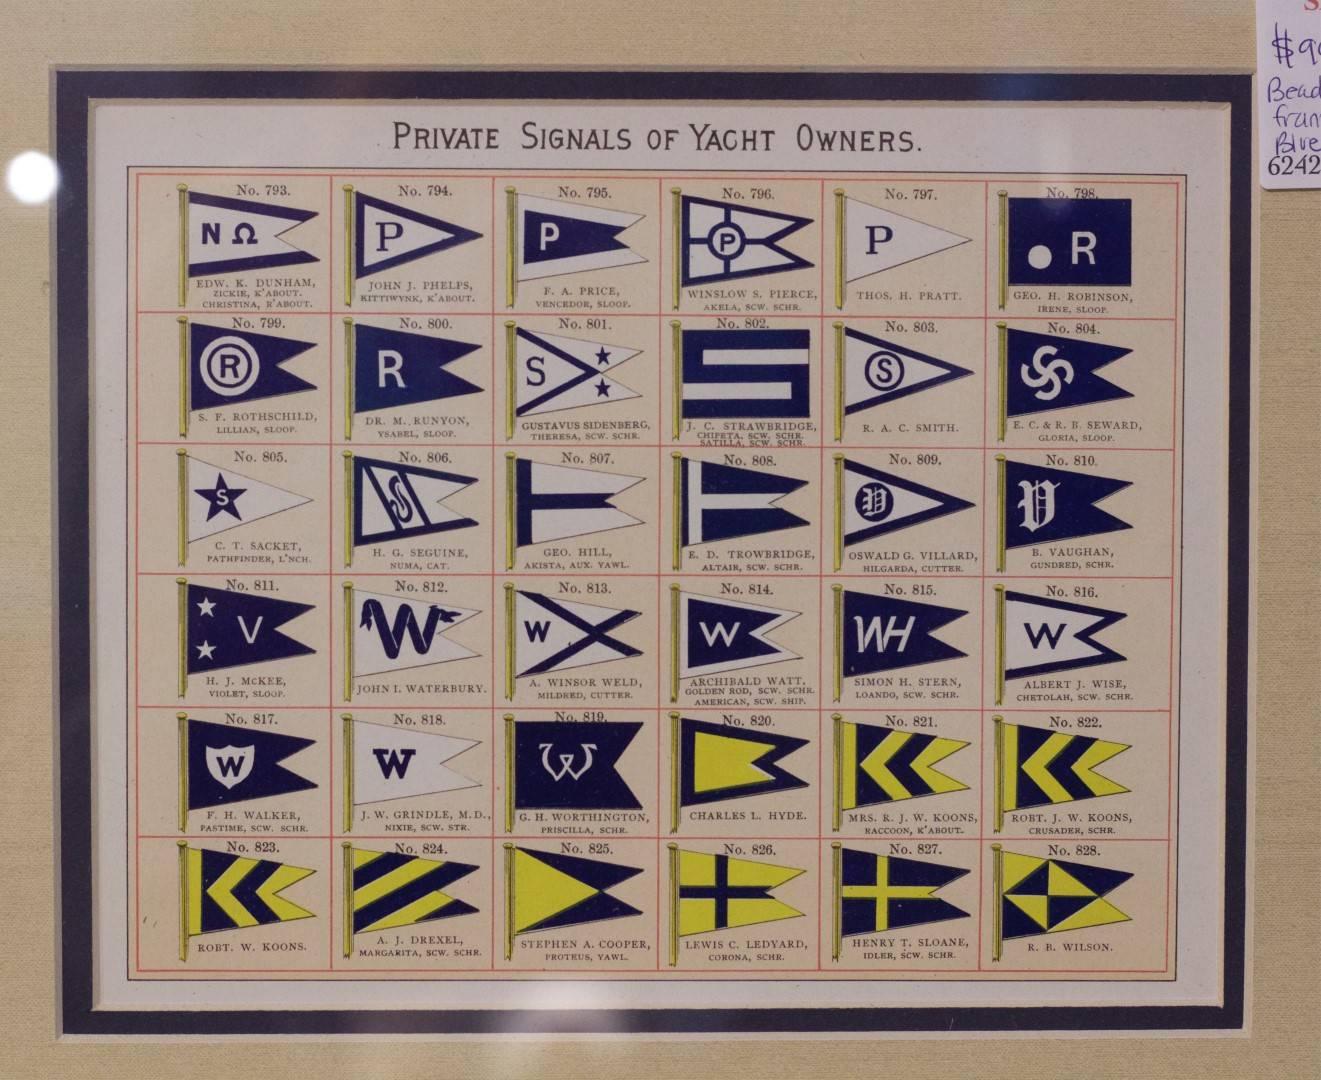 Original page from Lloyd's Register, early 20th century showing the private Signal flags of yacht owners. Numbers 793 to 828. Notable yacht owners include AJ Drexel, Robert Koons and more. Color theme is blue, white and yellow. Matted and framed.